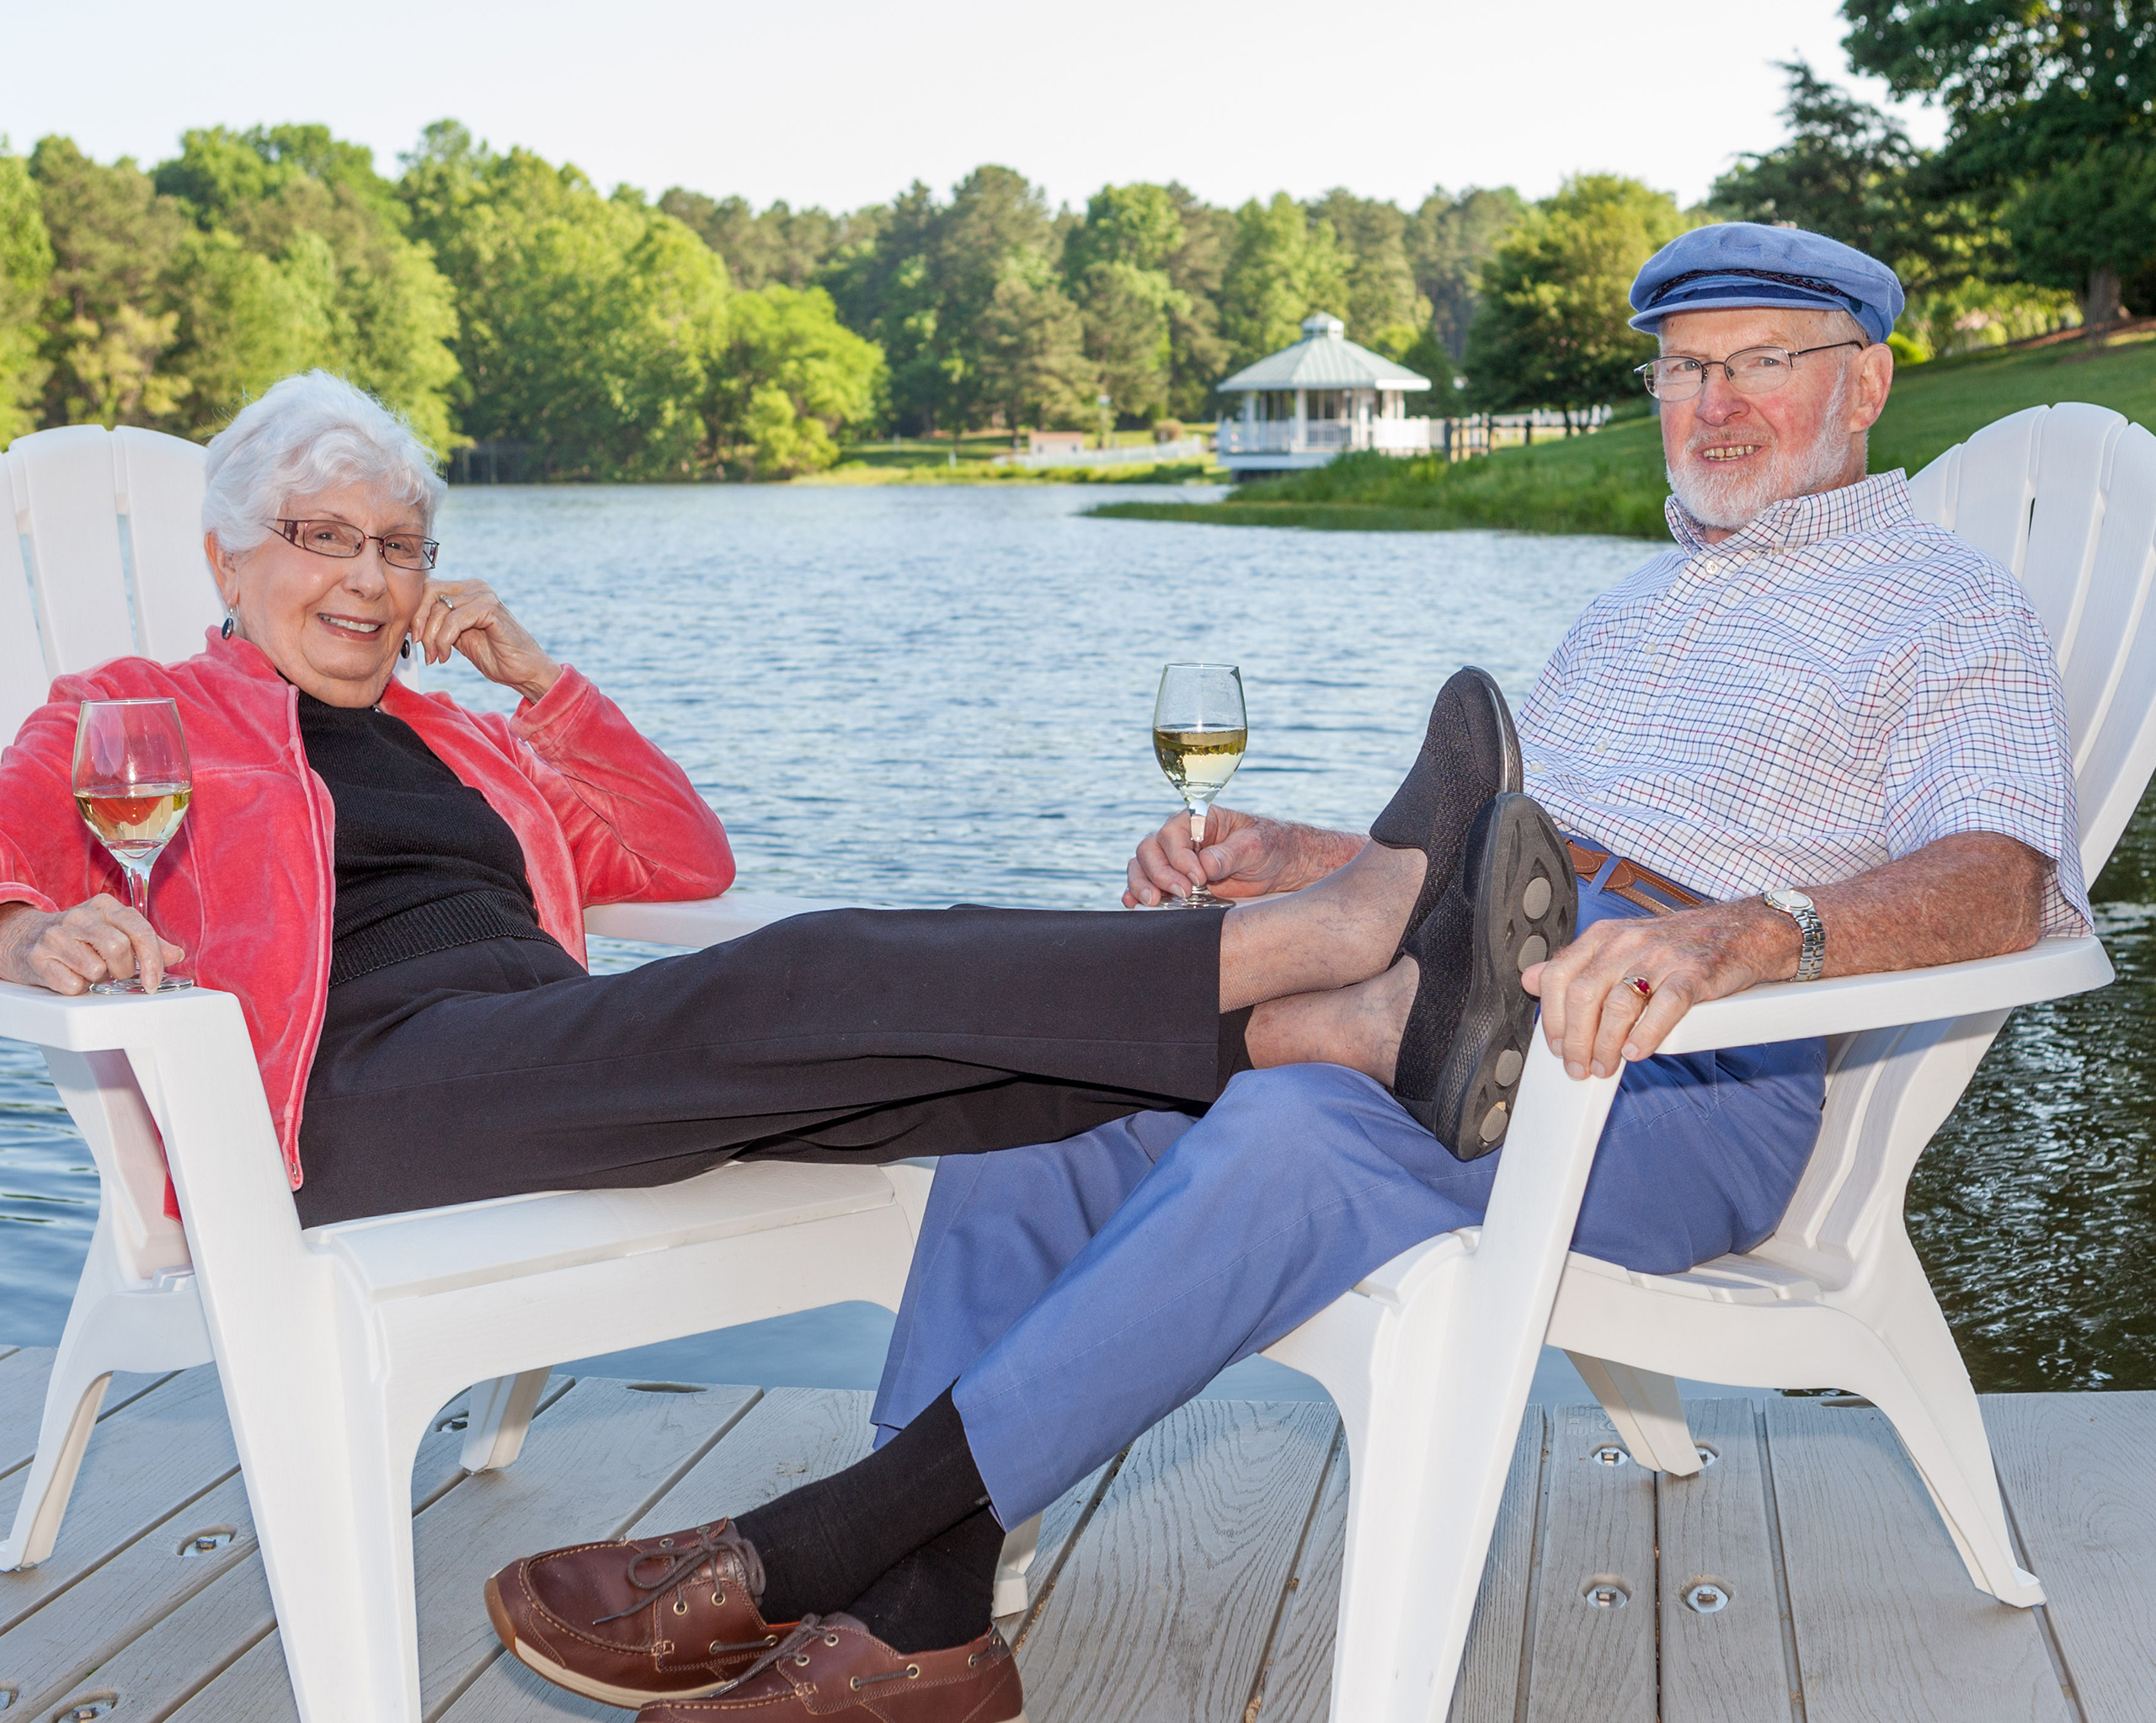 Judge Hess and a lady friend enjoy some wine while sitting on the dock at the lake